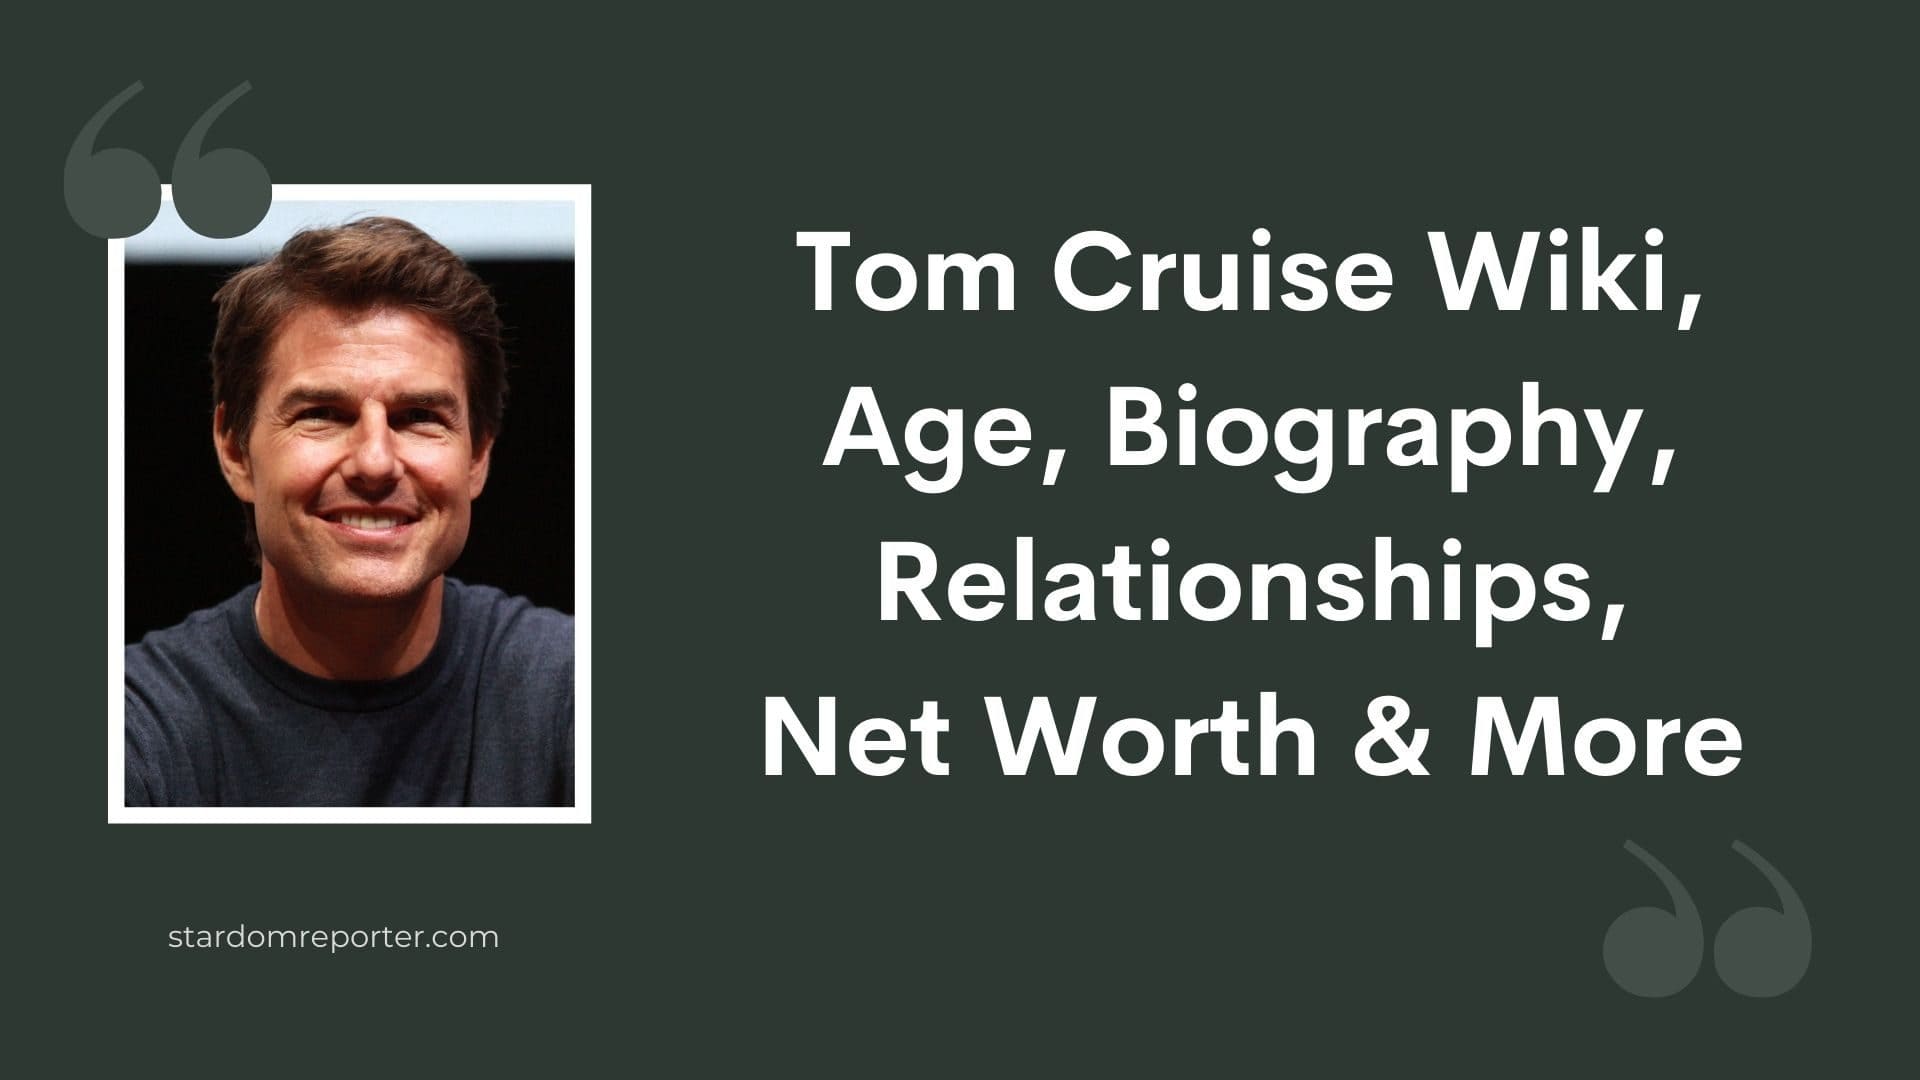 Tom Cruise Wiki, Age, Biography, Relationships, Net Worth & More - 41